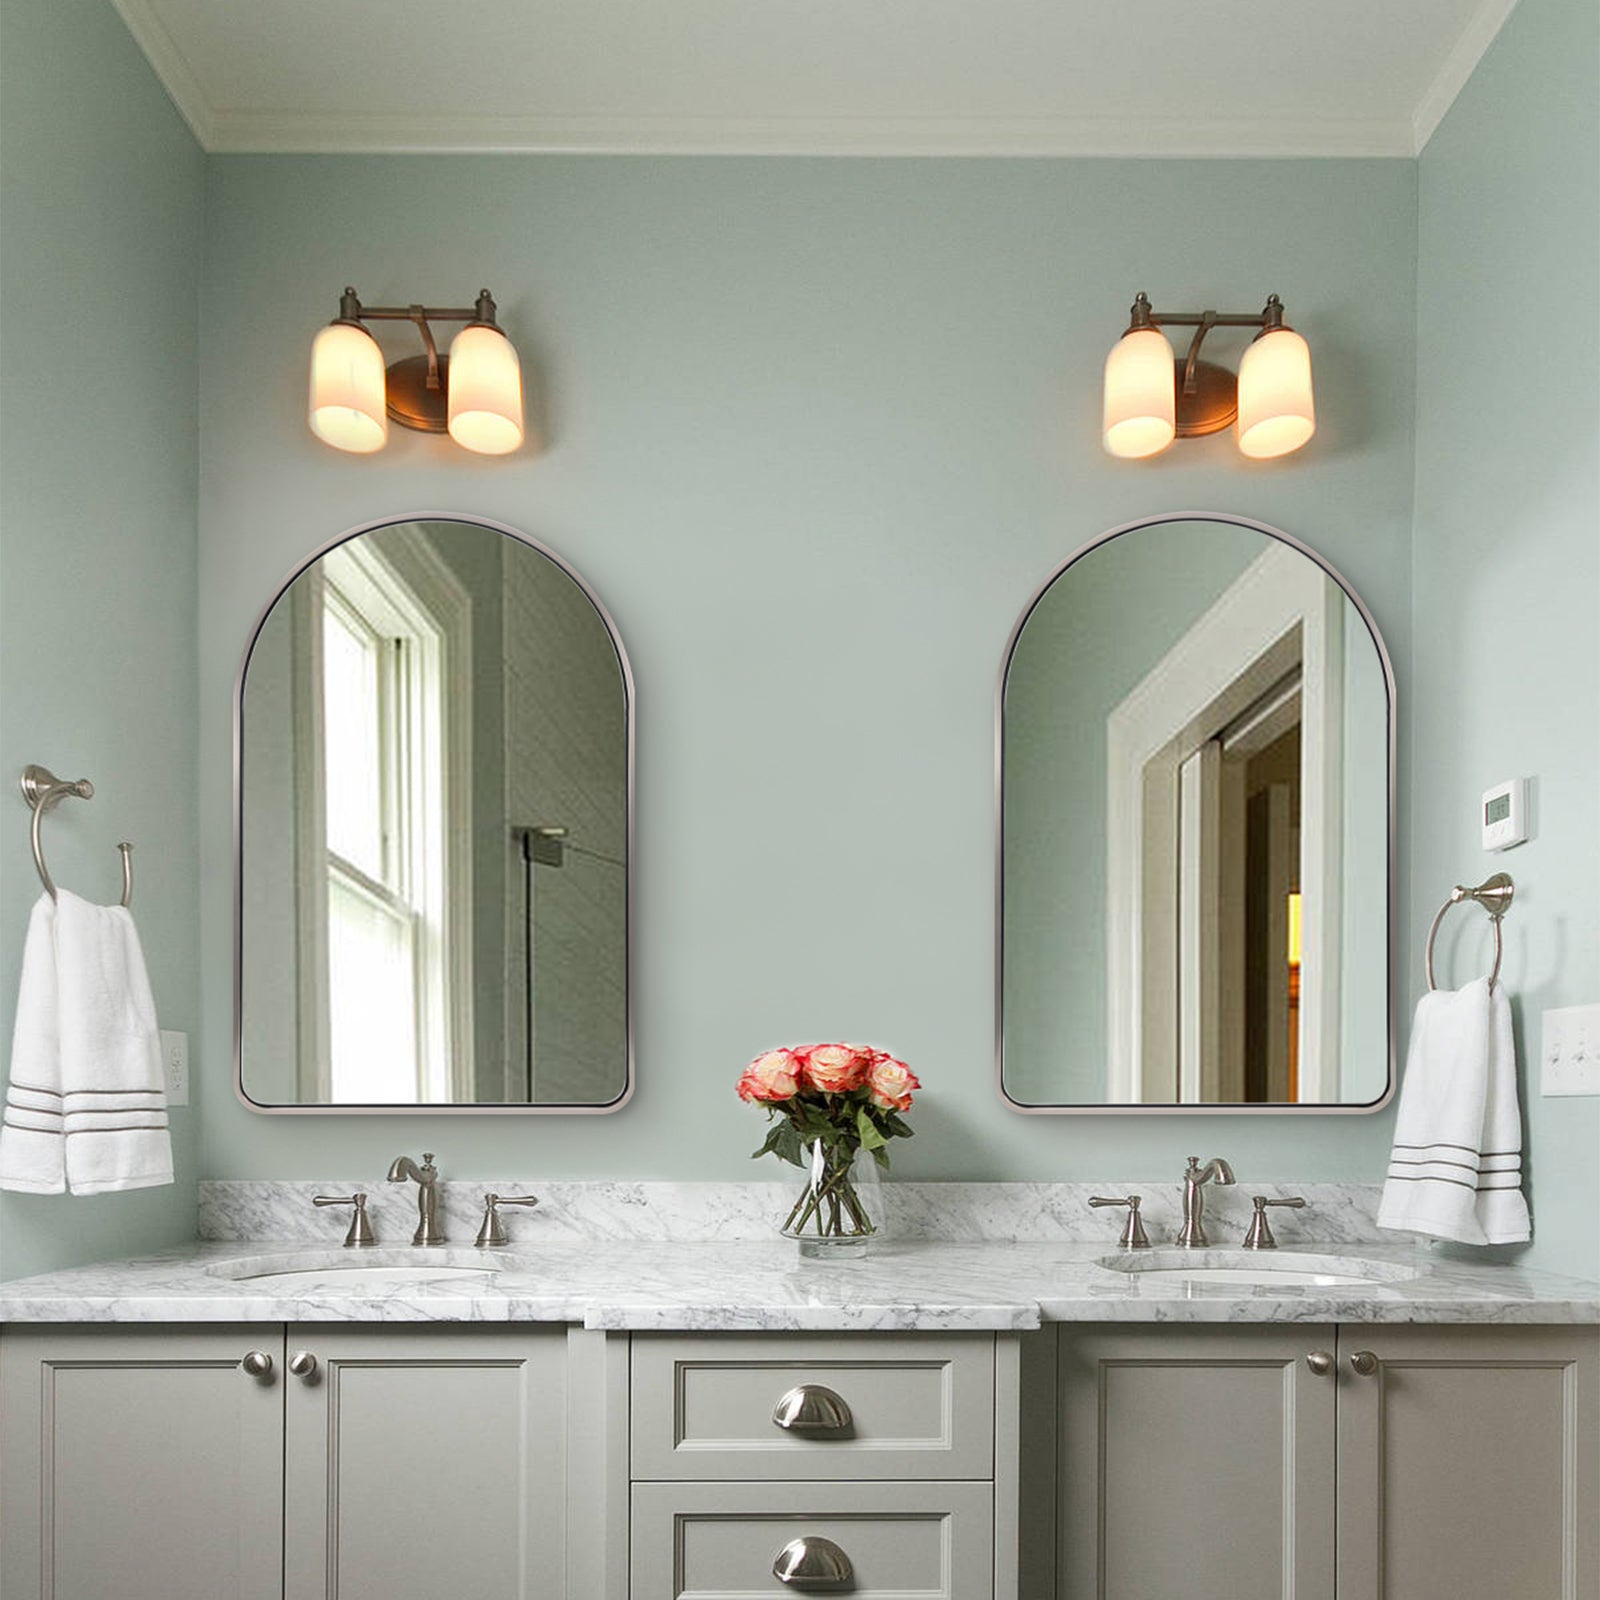 Bold Metal Framed Arched   Wall Mirrors for Bathroom/ Living Room/Entry